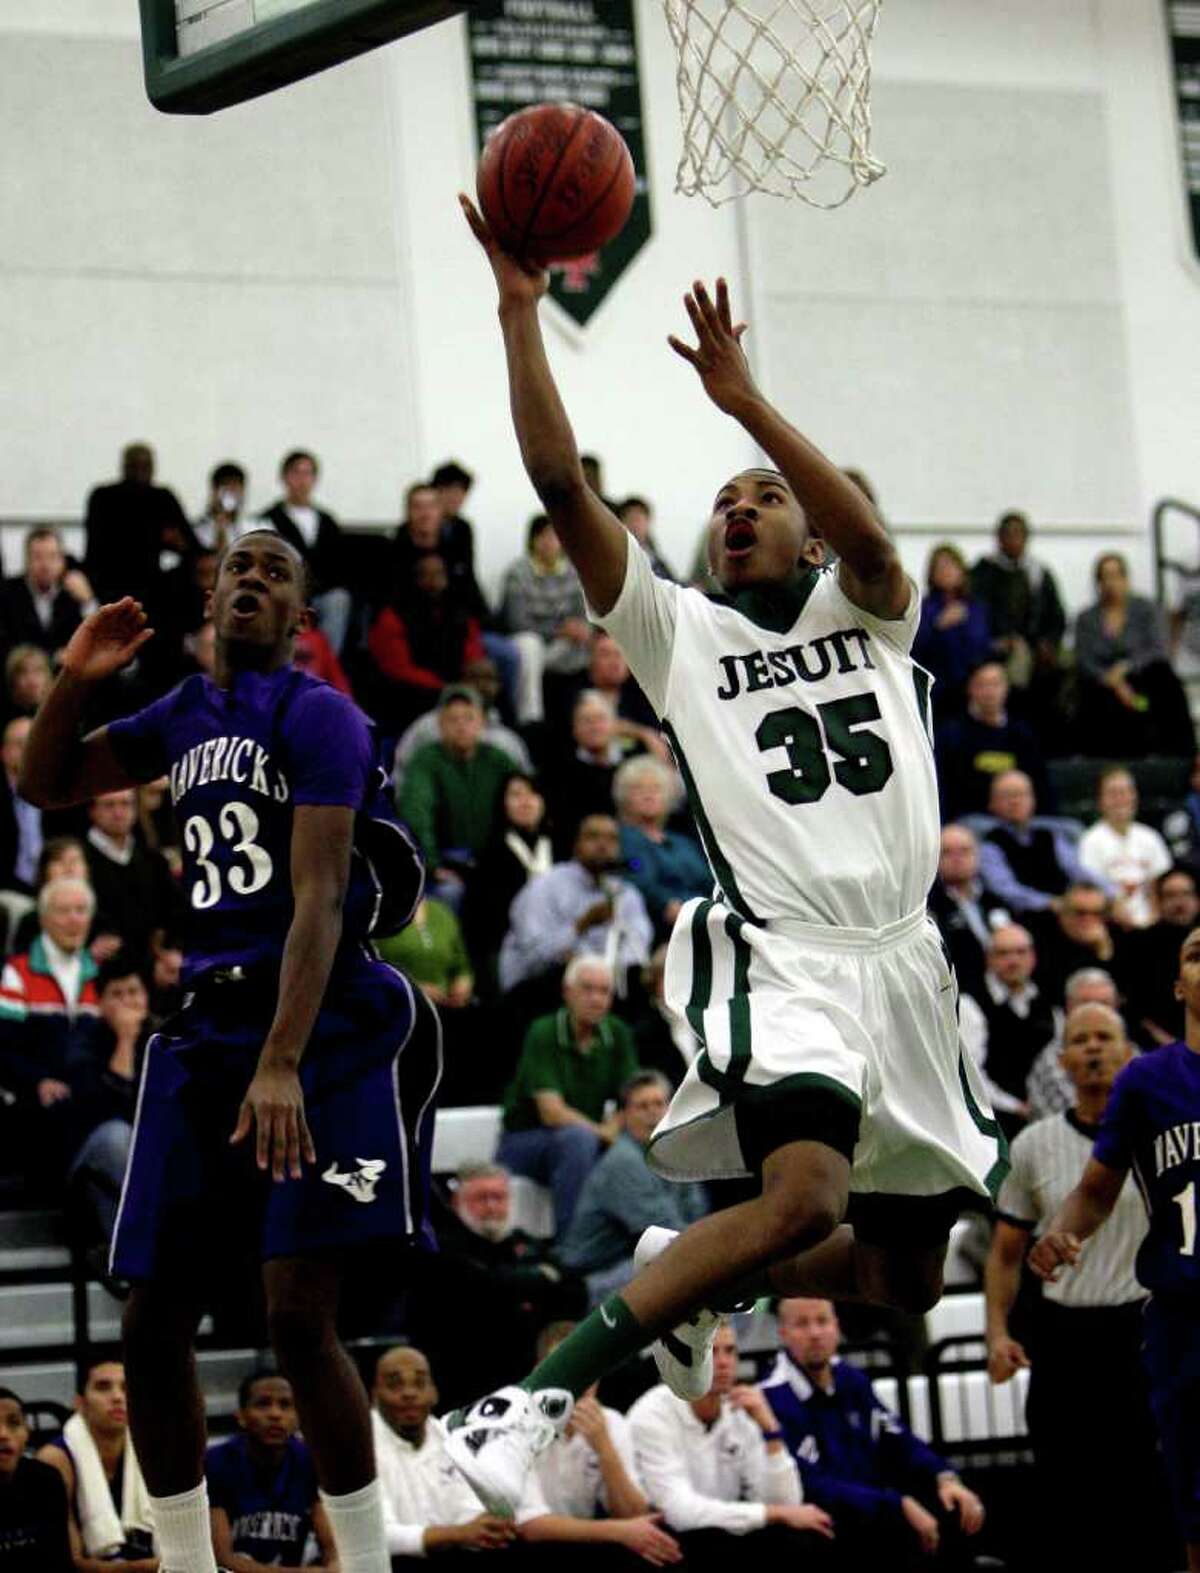 Strake Jesuit's Rasheed Sulaimon )35) drives to the basket around Morton Ranch's Chuck Anyasinti (33)during a basketball game between Morton Ranch and Strake Jesuit, Tuesday, Feb. 1, 2011. Strake Jesuit won 60-58 in double overtime.